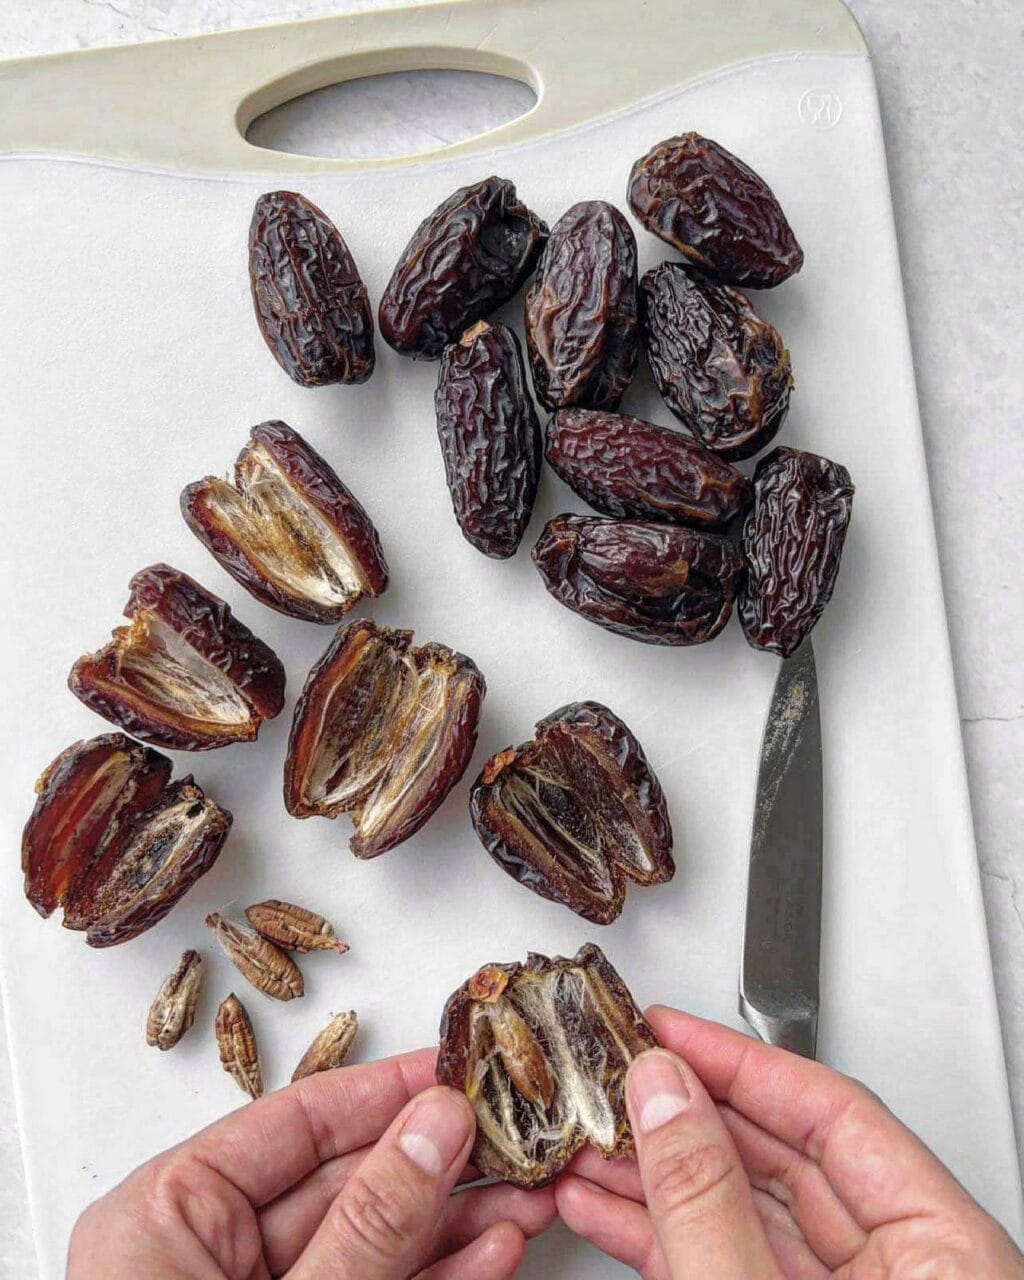 Medjool dates on a chopping board. Some are whole and some are sliced open with the pit removed.